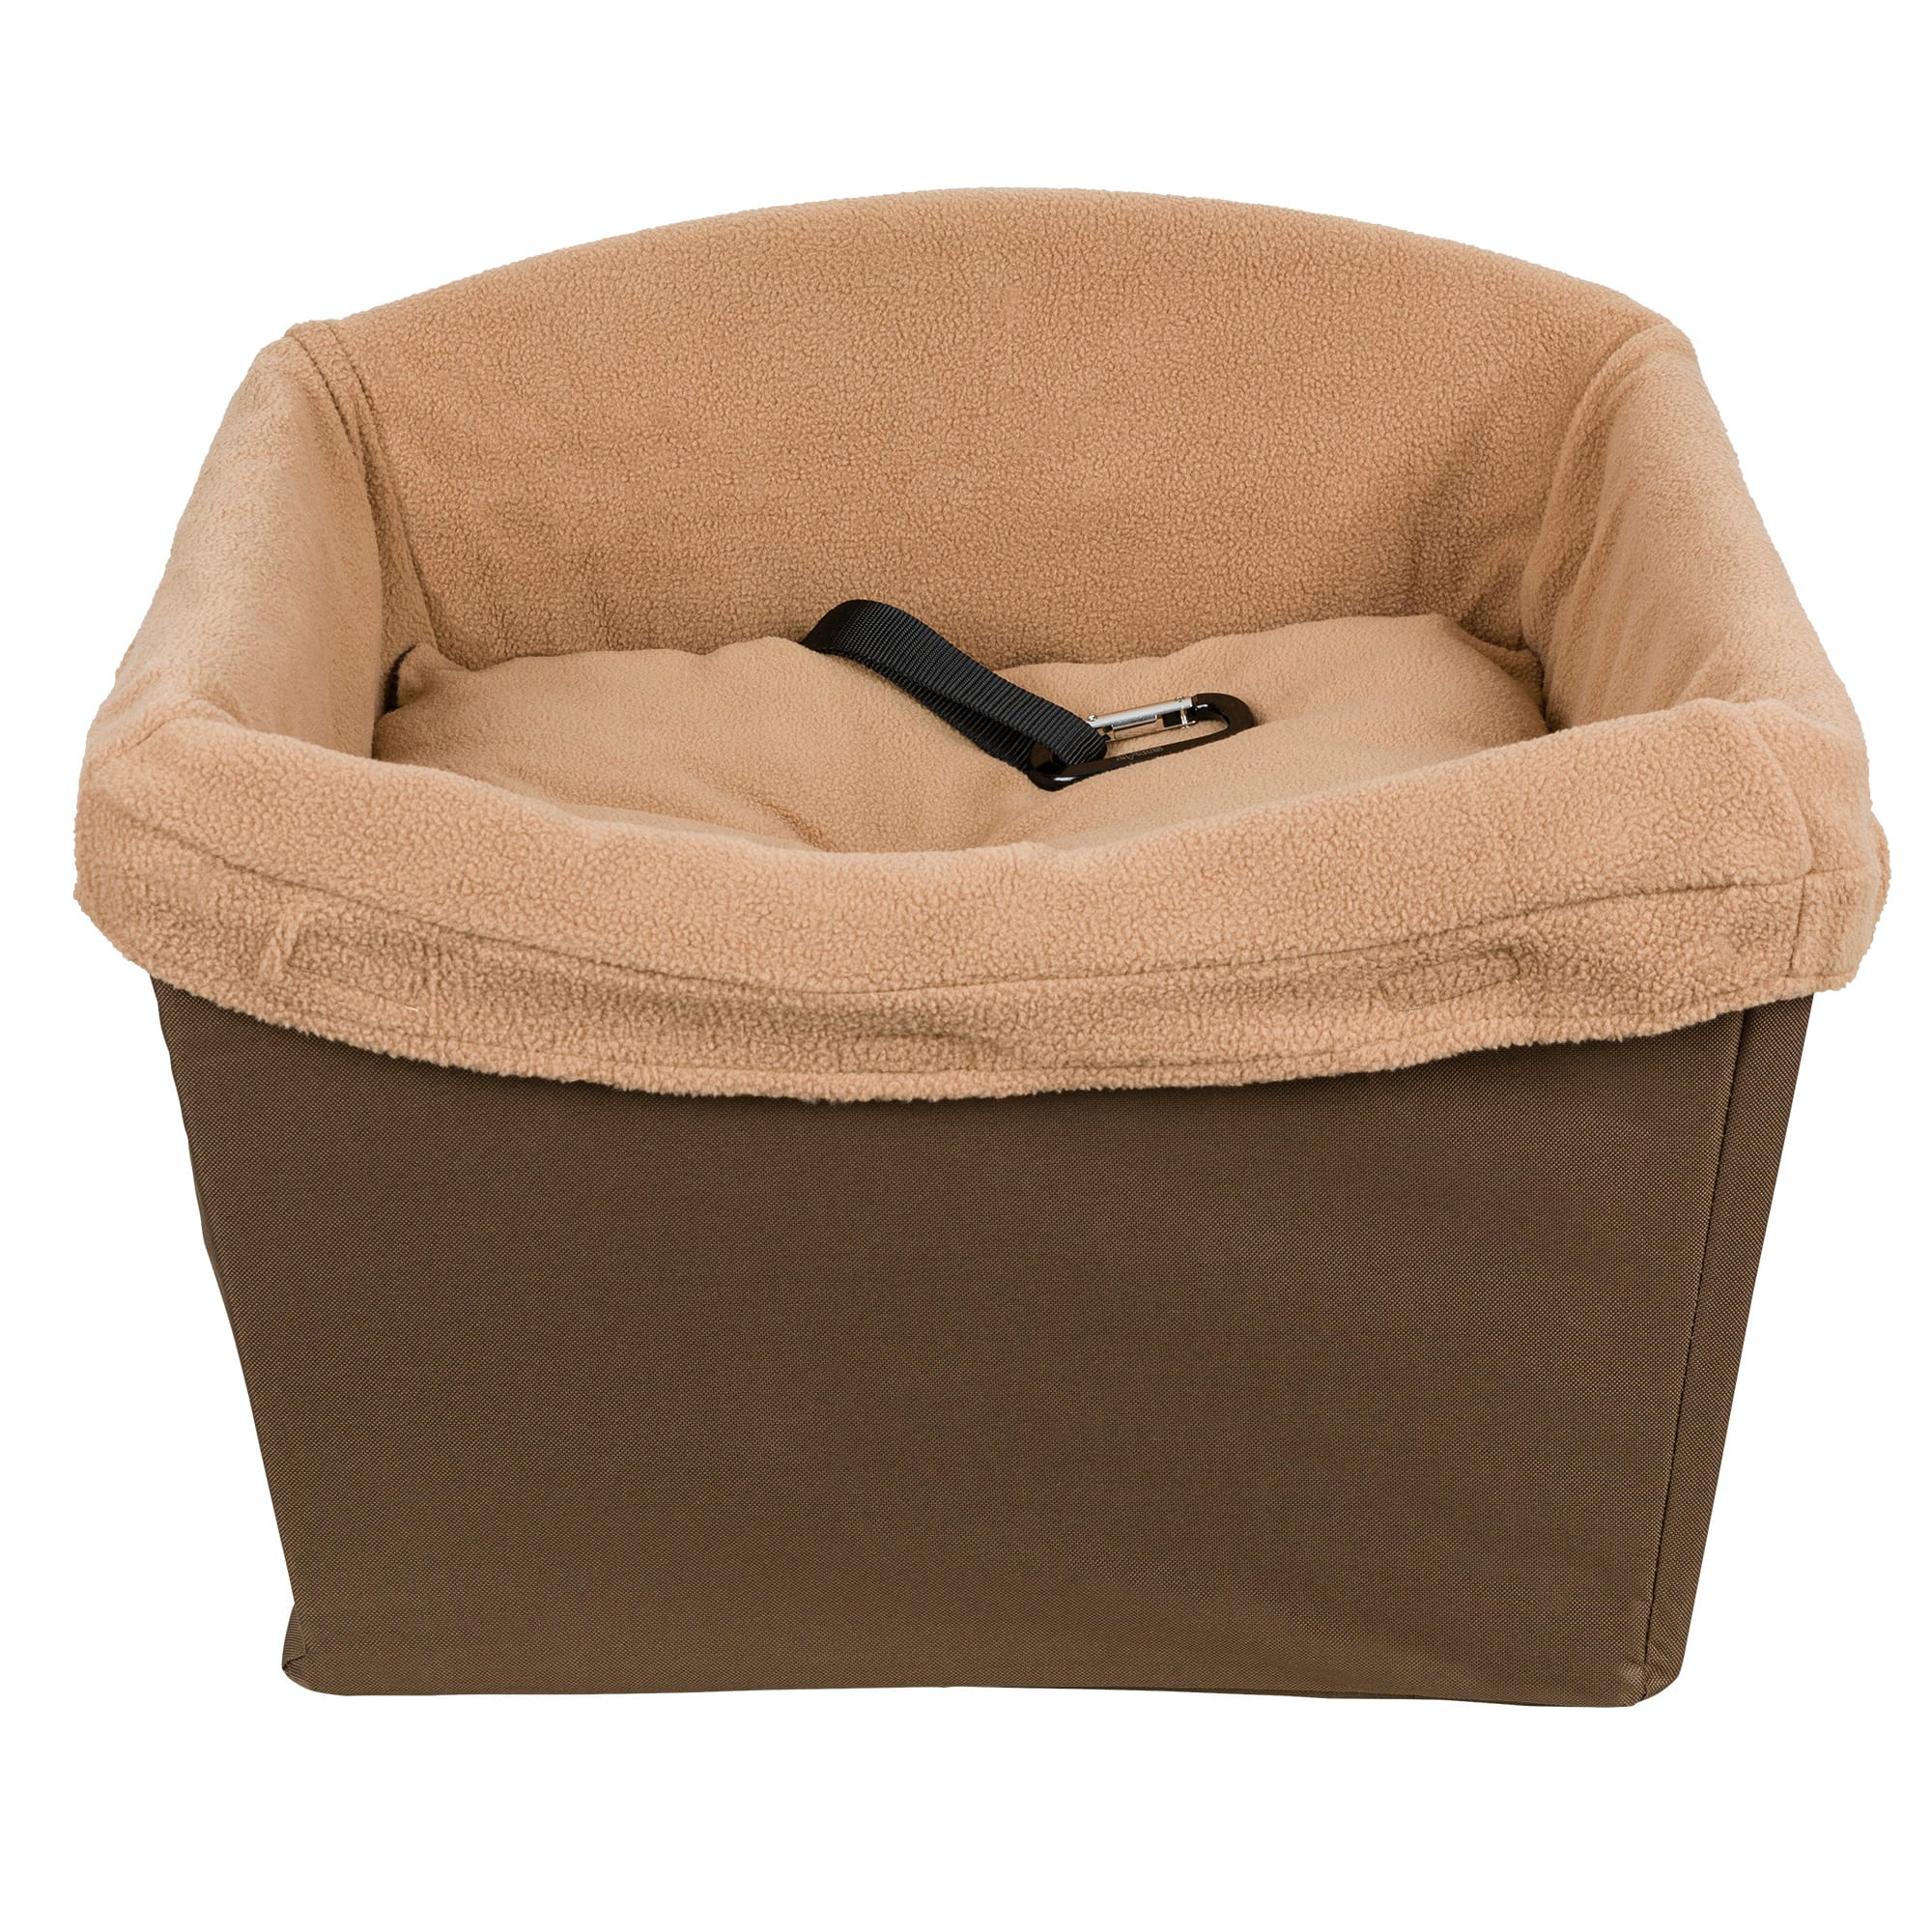 Photos - Dog Food PetSafe Happy Ride Standard Pet Safety Seat, 22 IN, Tan / Off-Whit 